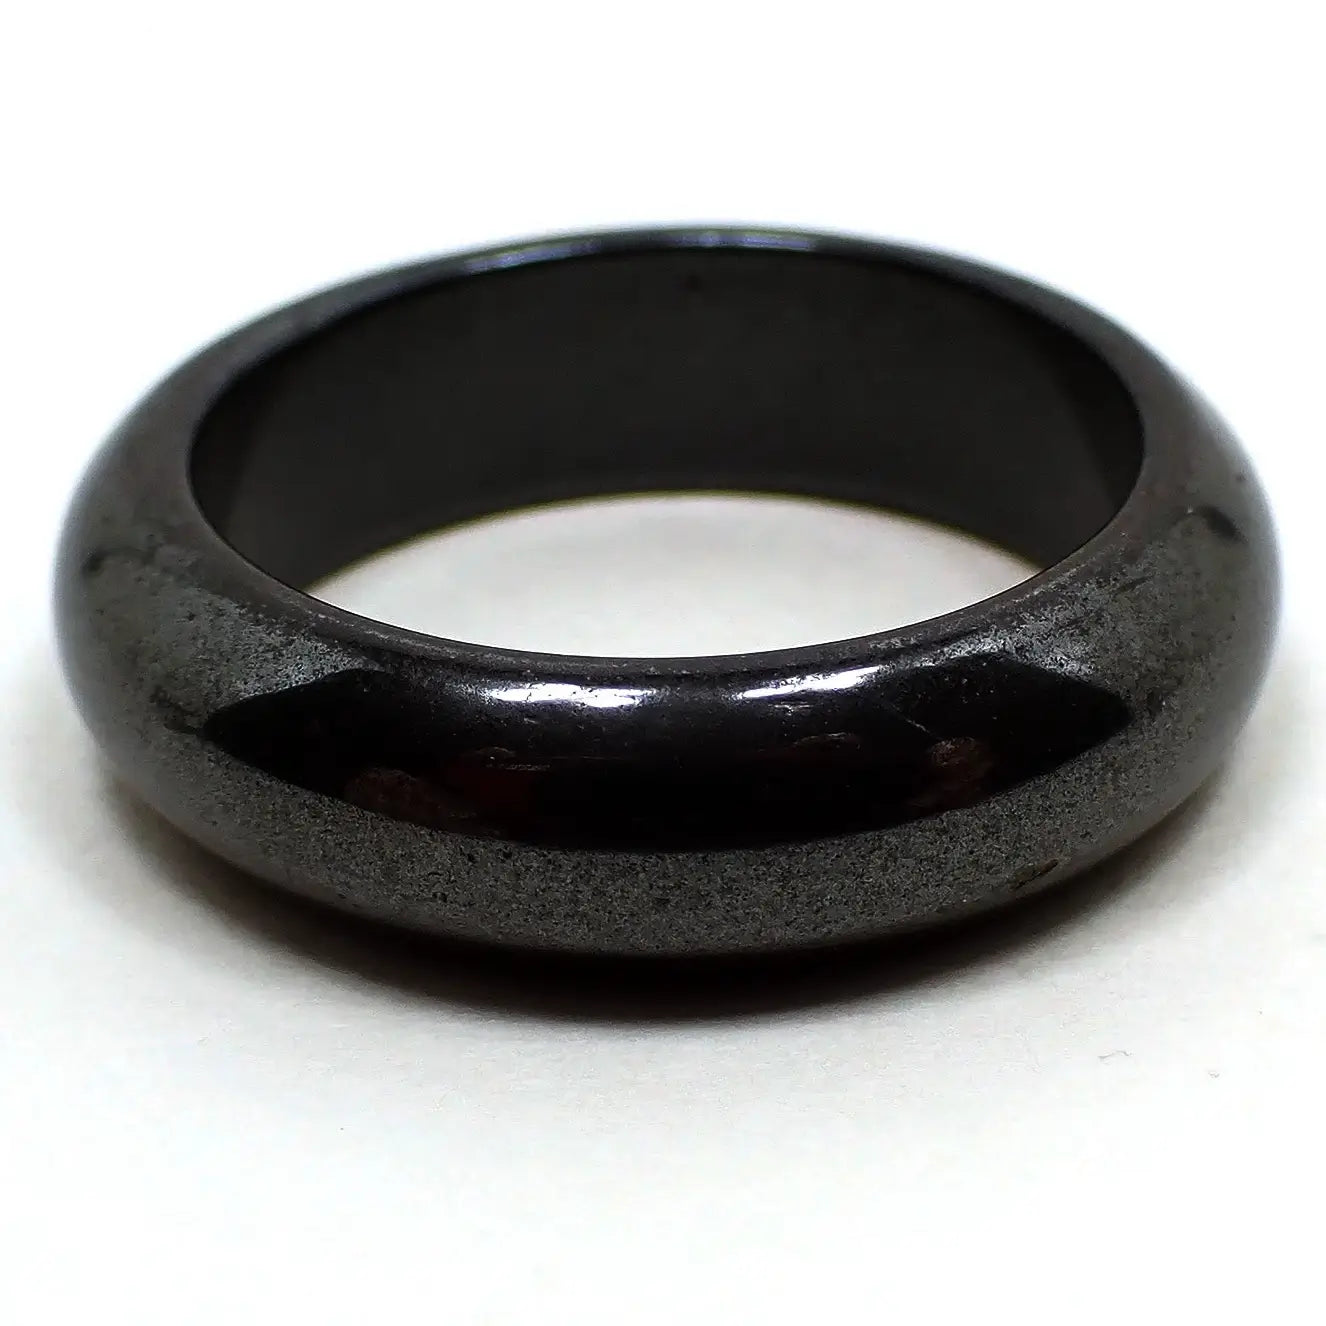 Enlarged side view of the retro vintage hematite band ring. It is dark metallic gray in color and has a rounded edge. 